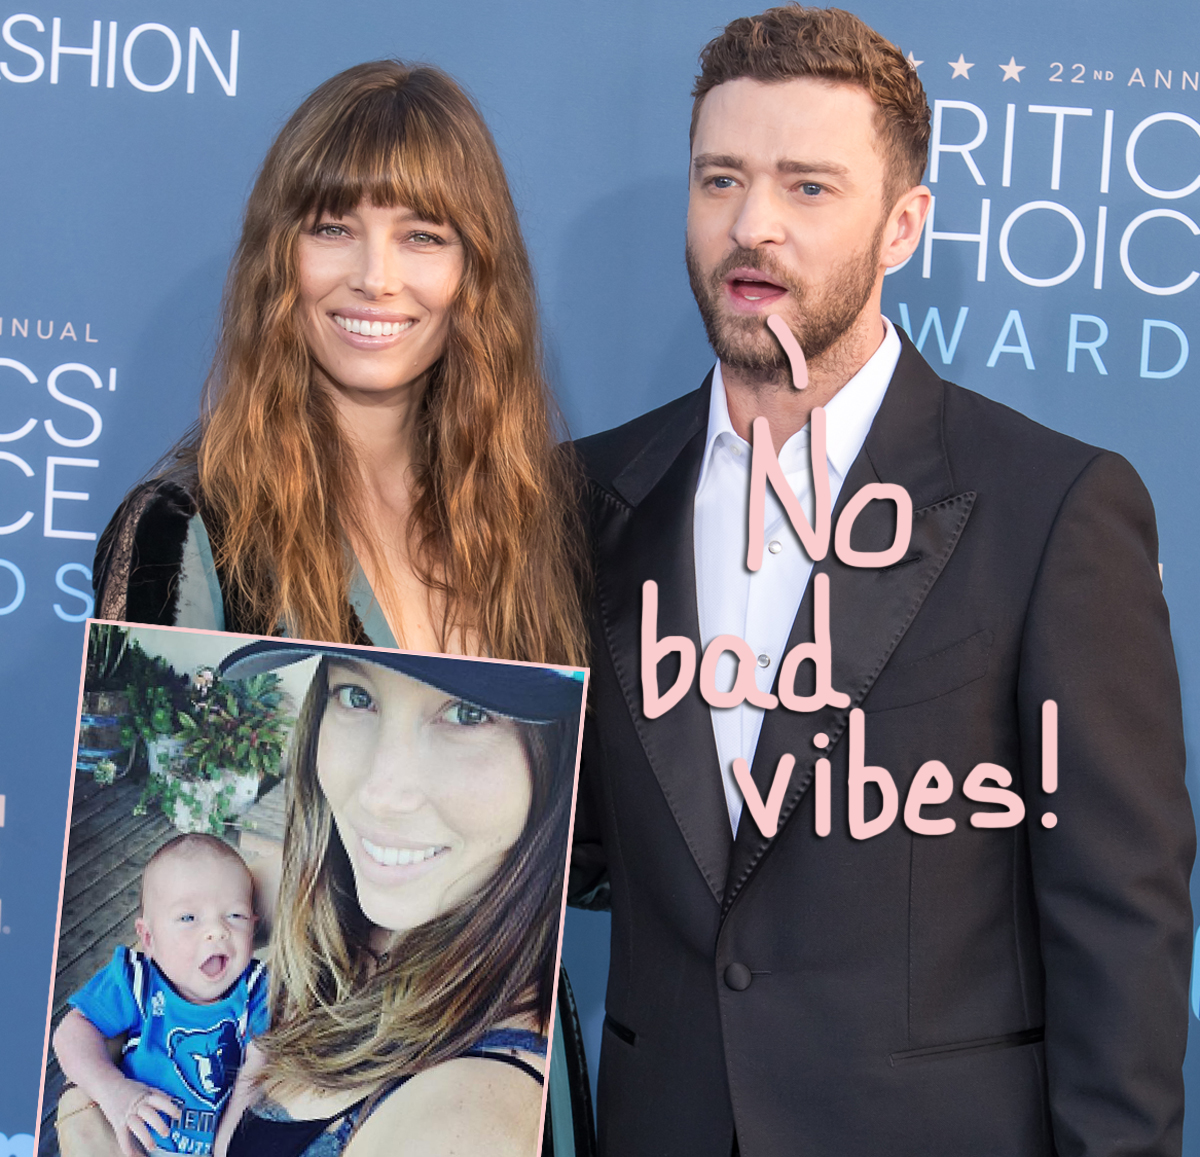 Jessica Biel opens up about being a mom of two with Justin Timberlake